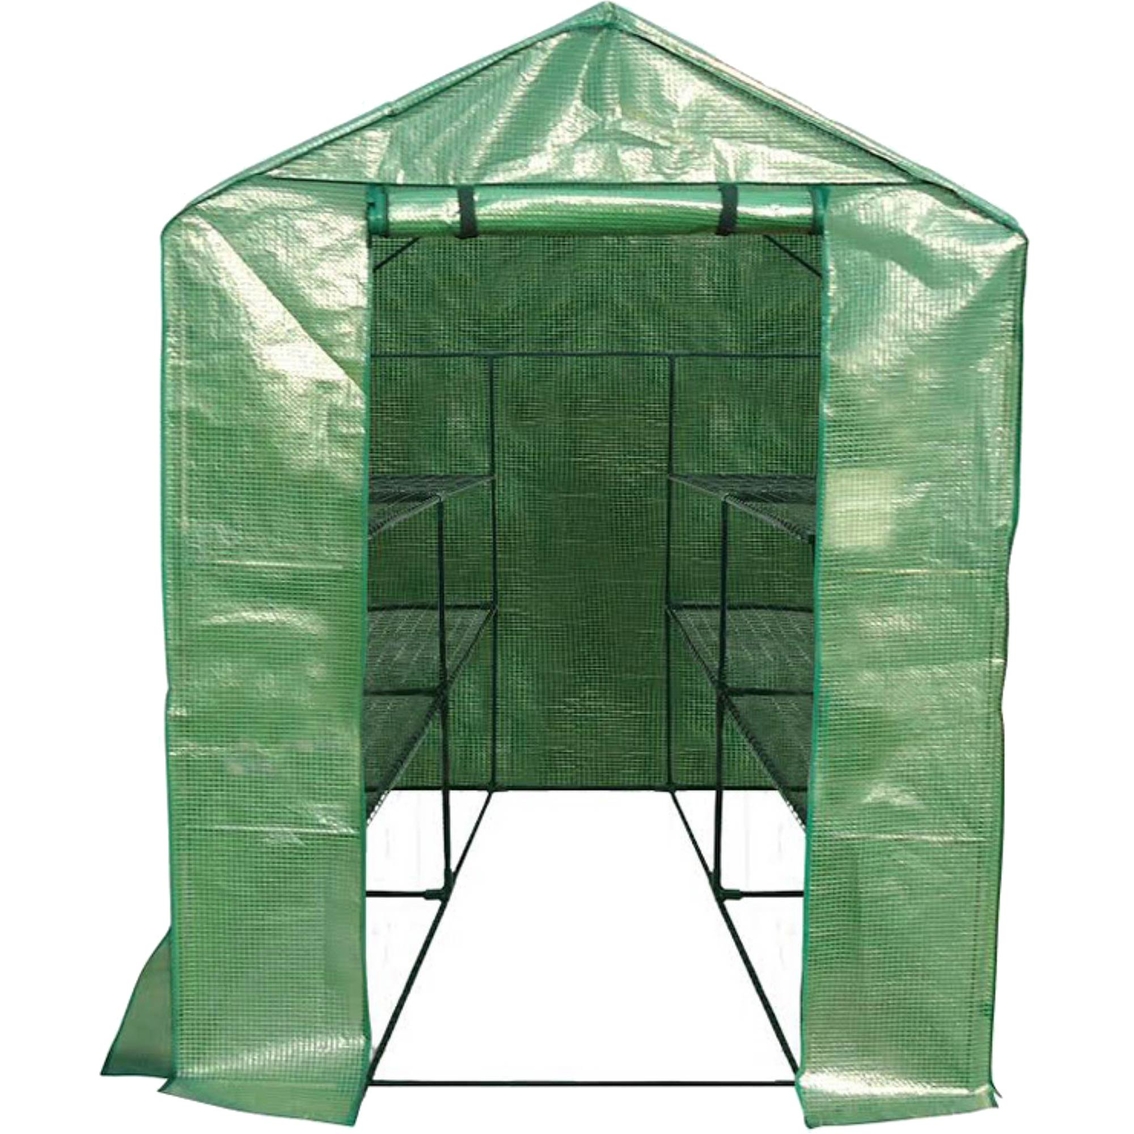 Ogrow Large Heavy Duty Walk In 2 Tier 8 Shelf Portable Lawn and Garden Greenhouse - Image 2 of 2